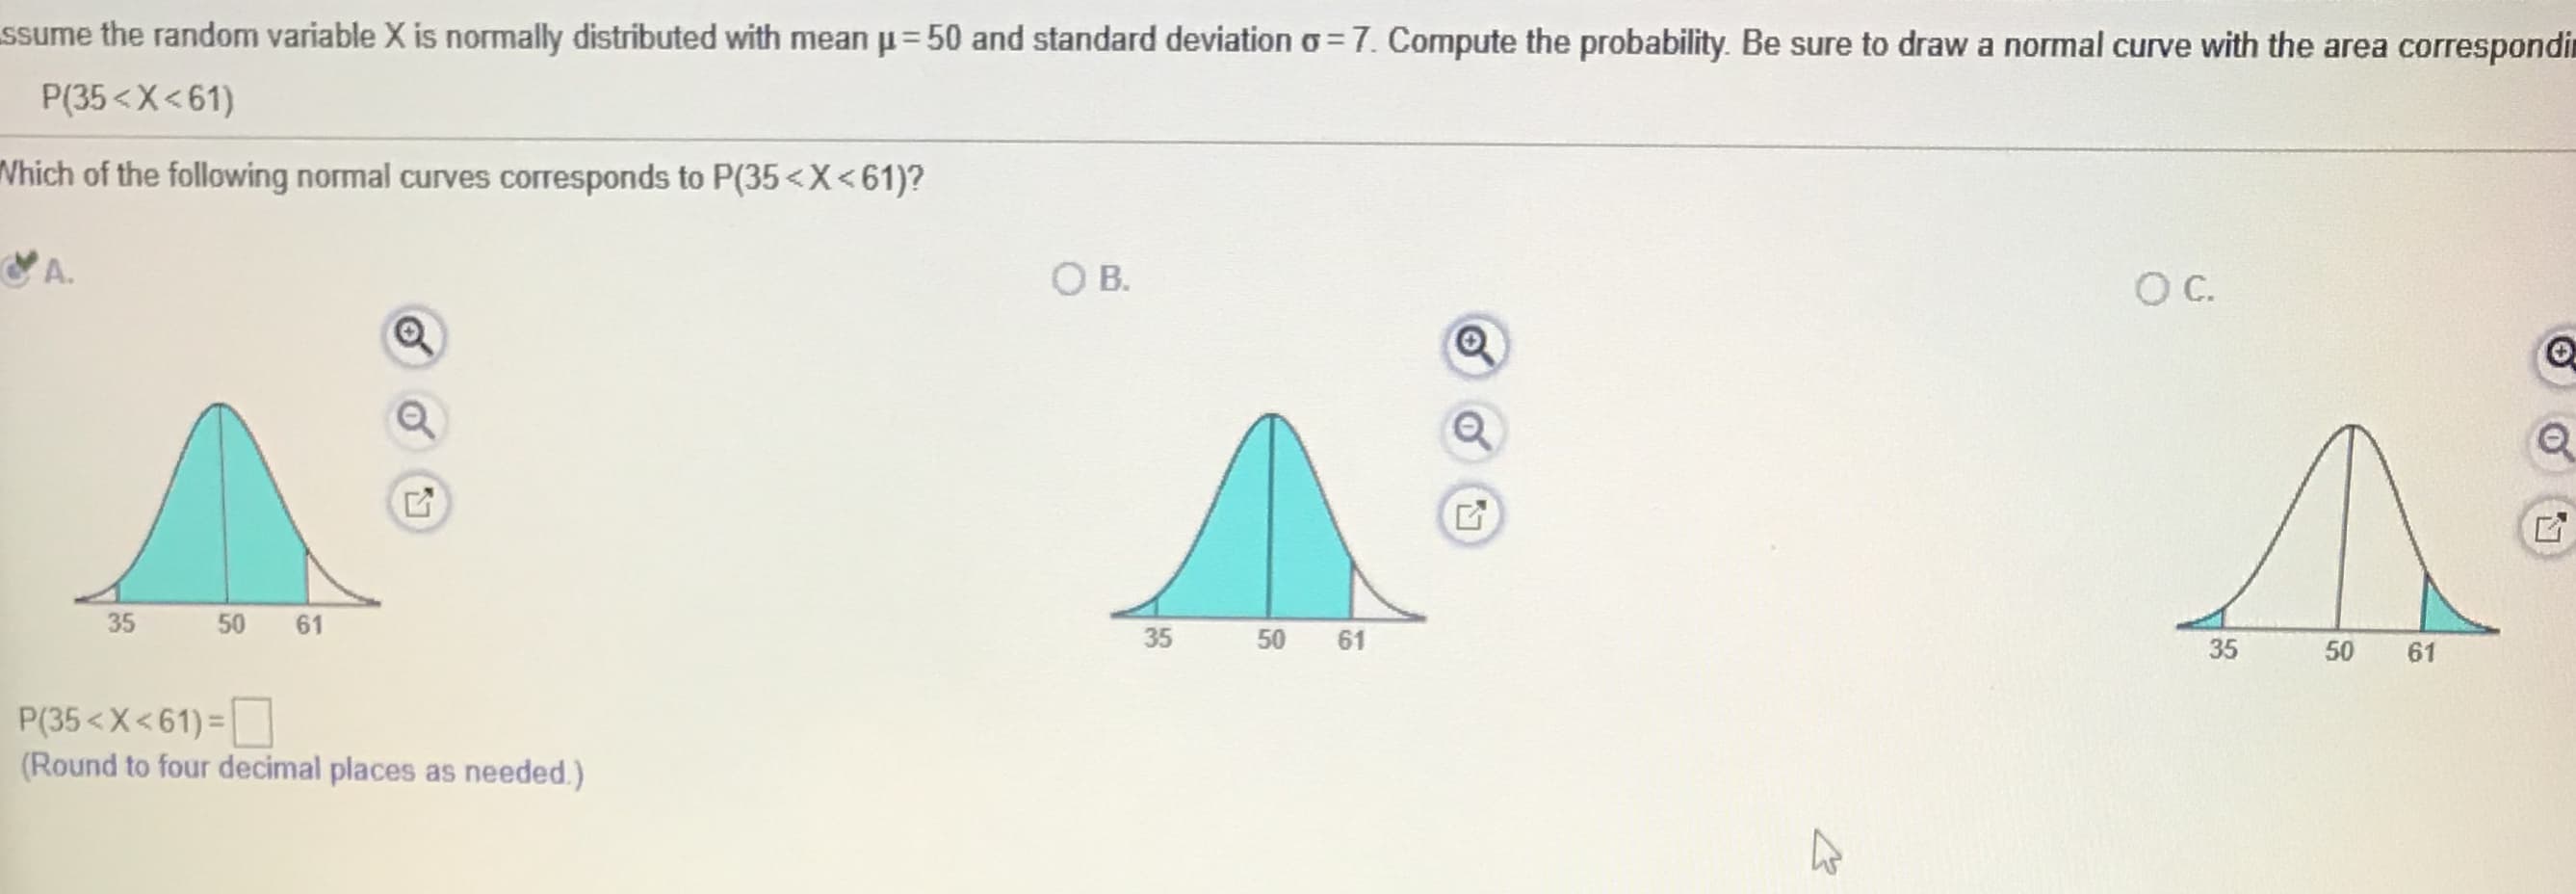 ssume the random variable X is normally distributed with mean p=50 and standard deviation o =7. Compute the probability. Be sure to draw a normal curve with the area correspondit
P(35<X<61)
Vhich of the following normal curves corresponds to P(35<X<61)?
A.
OB.
B.
35
50 61
35
50 61
61
P(35<X<61) =
(Round to four decimal places as needed.)
50
35
